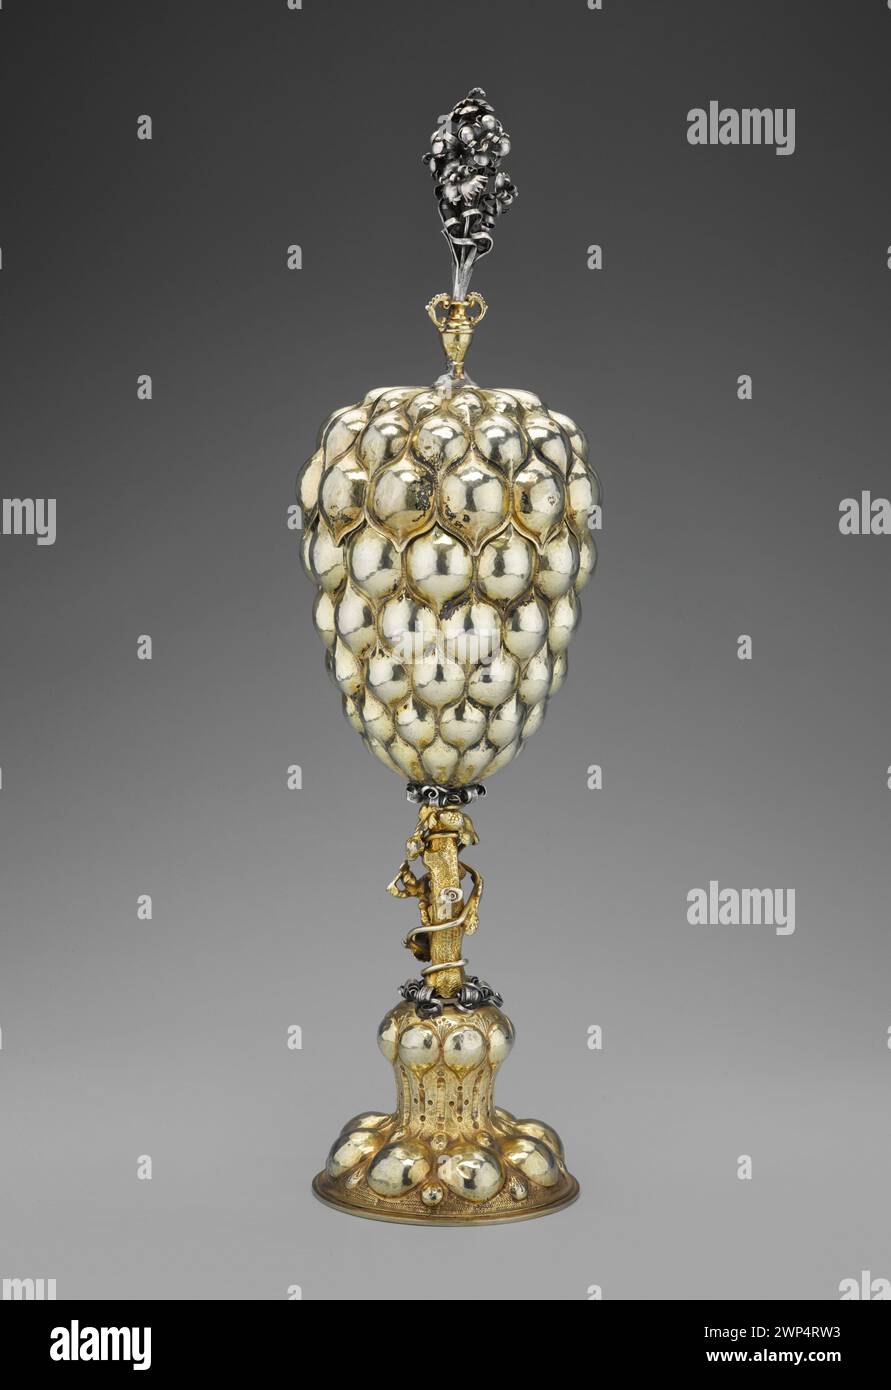 Cup in the form of pineapple; Müllner, Michael (Fl. 1612-1650); the 1920s (1625-00-00-1635-00-00);Szwarc, Szymon (1884-197.) - collection, pineapple (TYPE TYPE), baroque (style), woodwoods, flower, birds, grapes, vines, purchase (provenance) Stock Photo